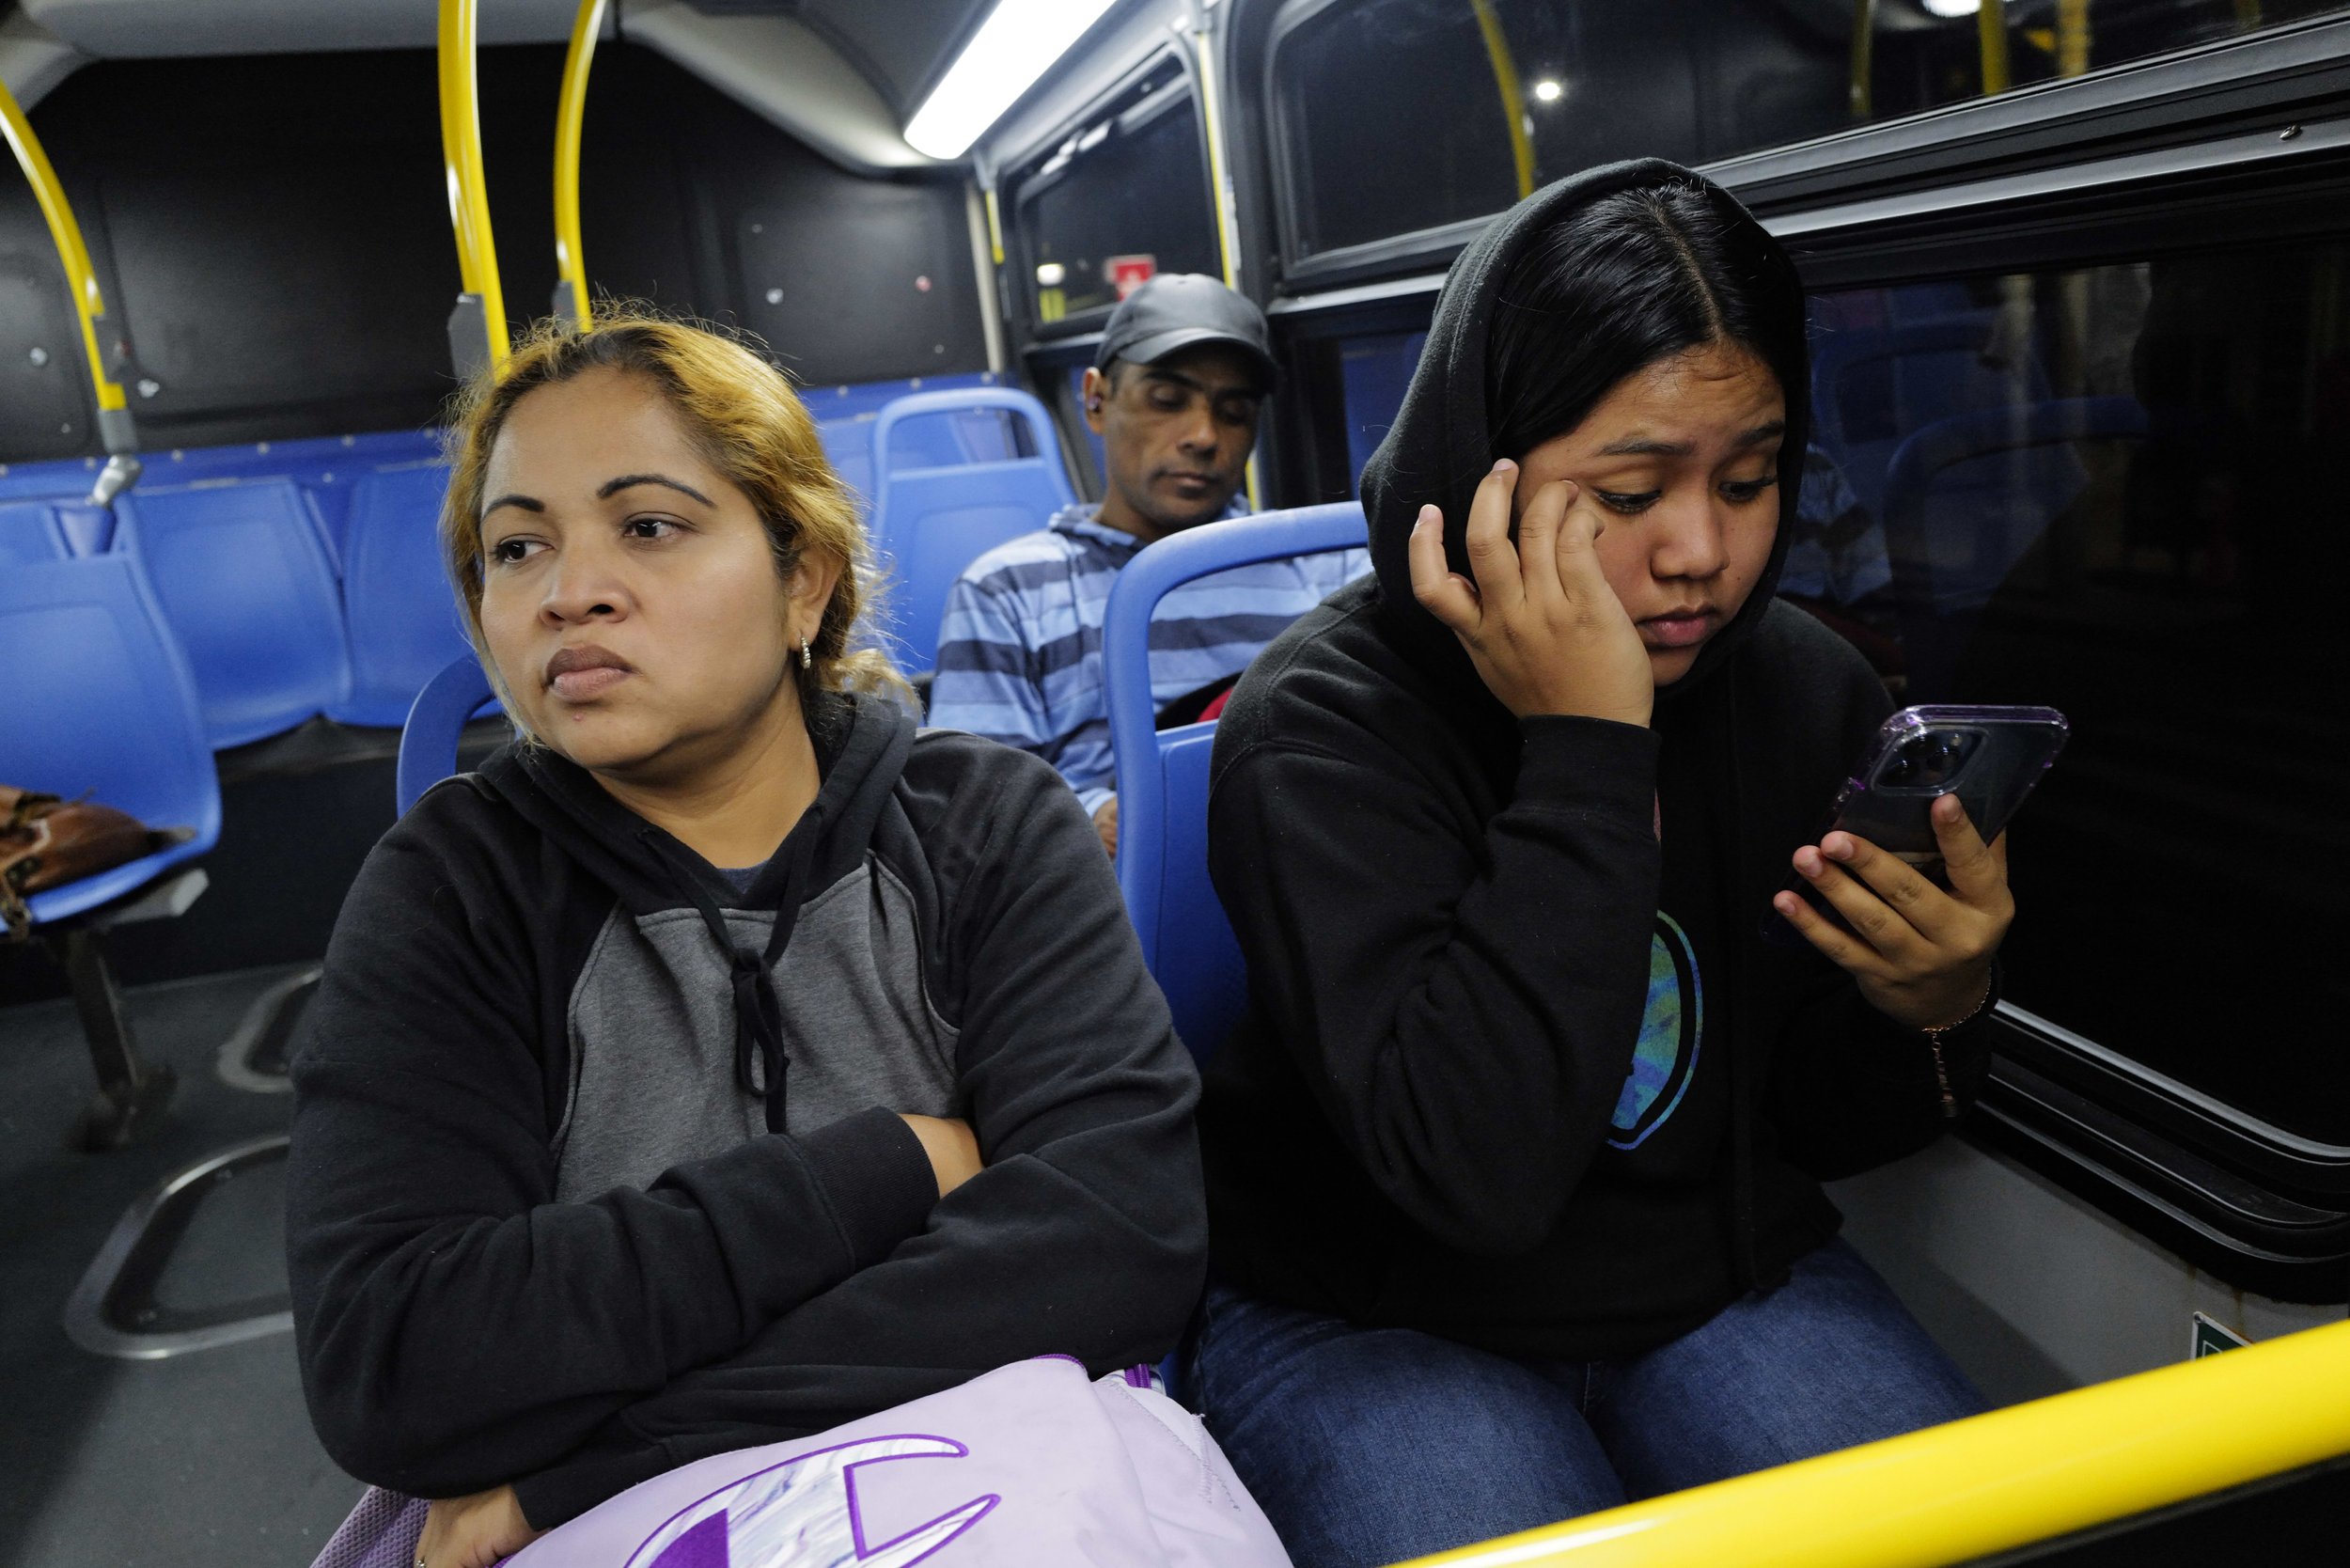  Teresa, her daughter Kairy Lisbeth, 17, and Manuel ride the bus home after Teresa and Manuel finished work on Sept. 30, 2022.  